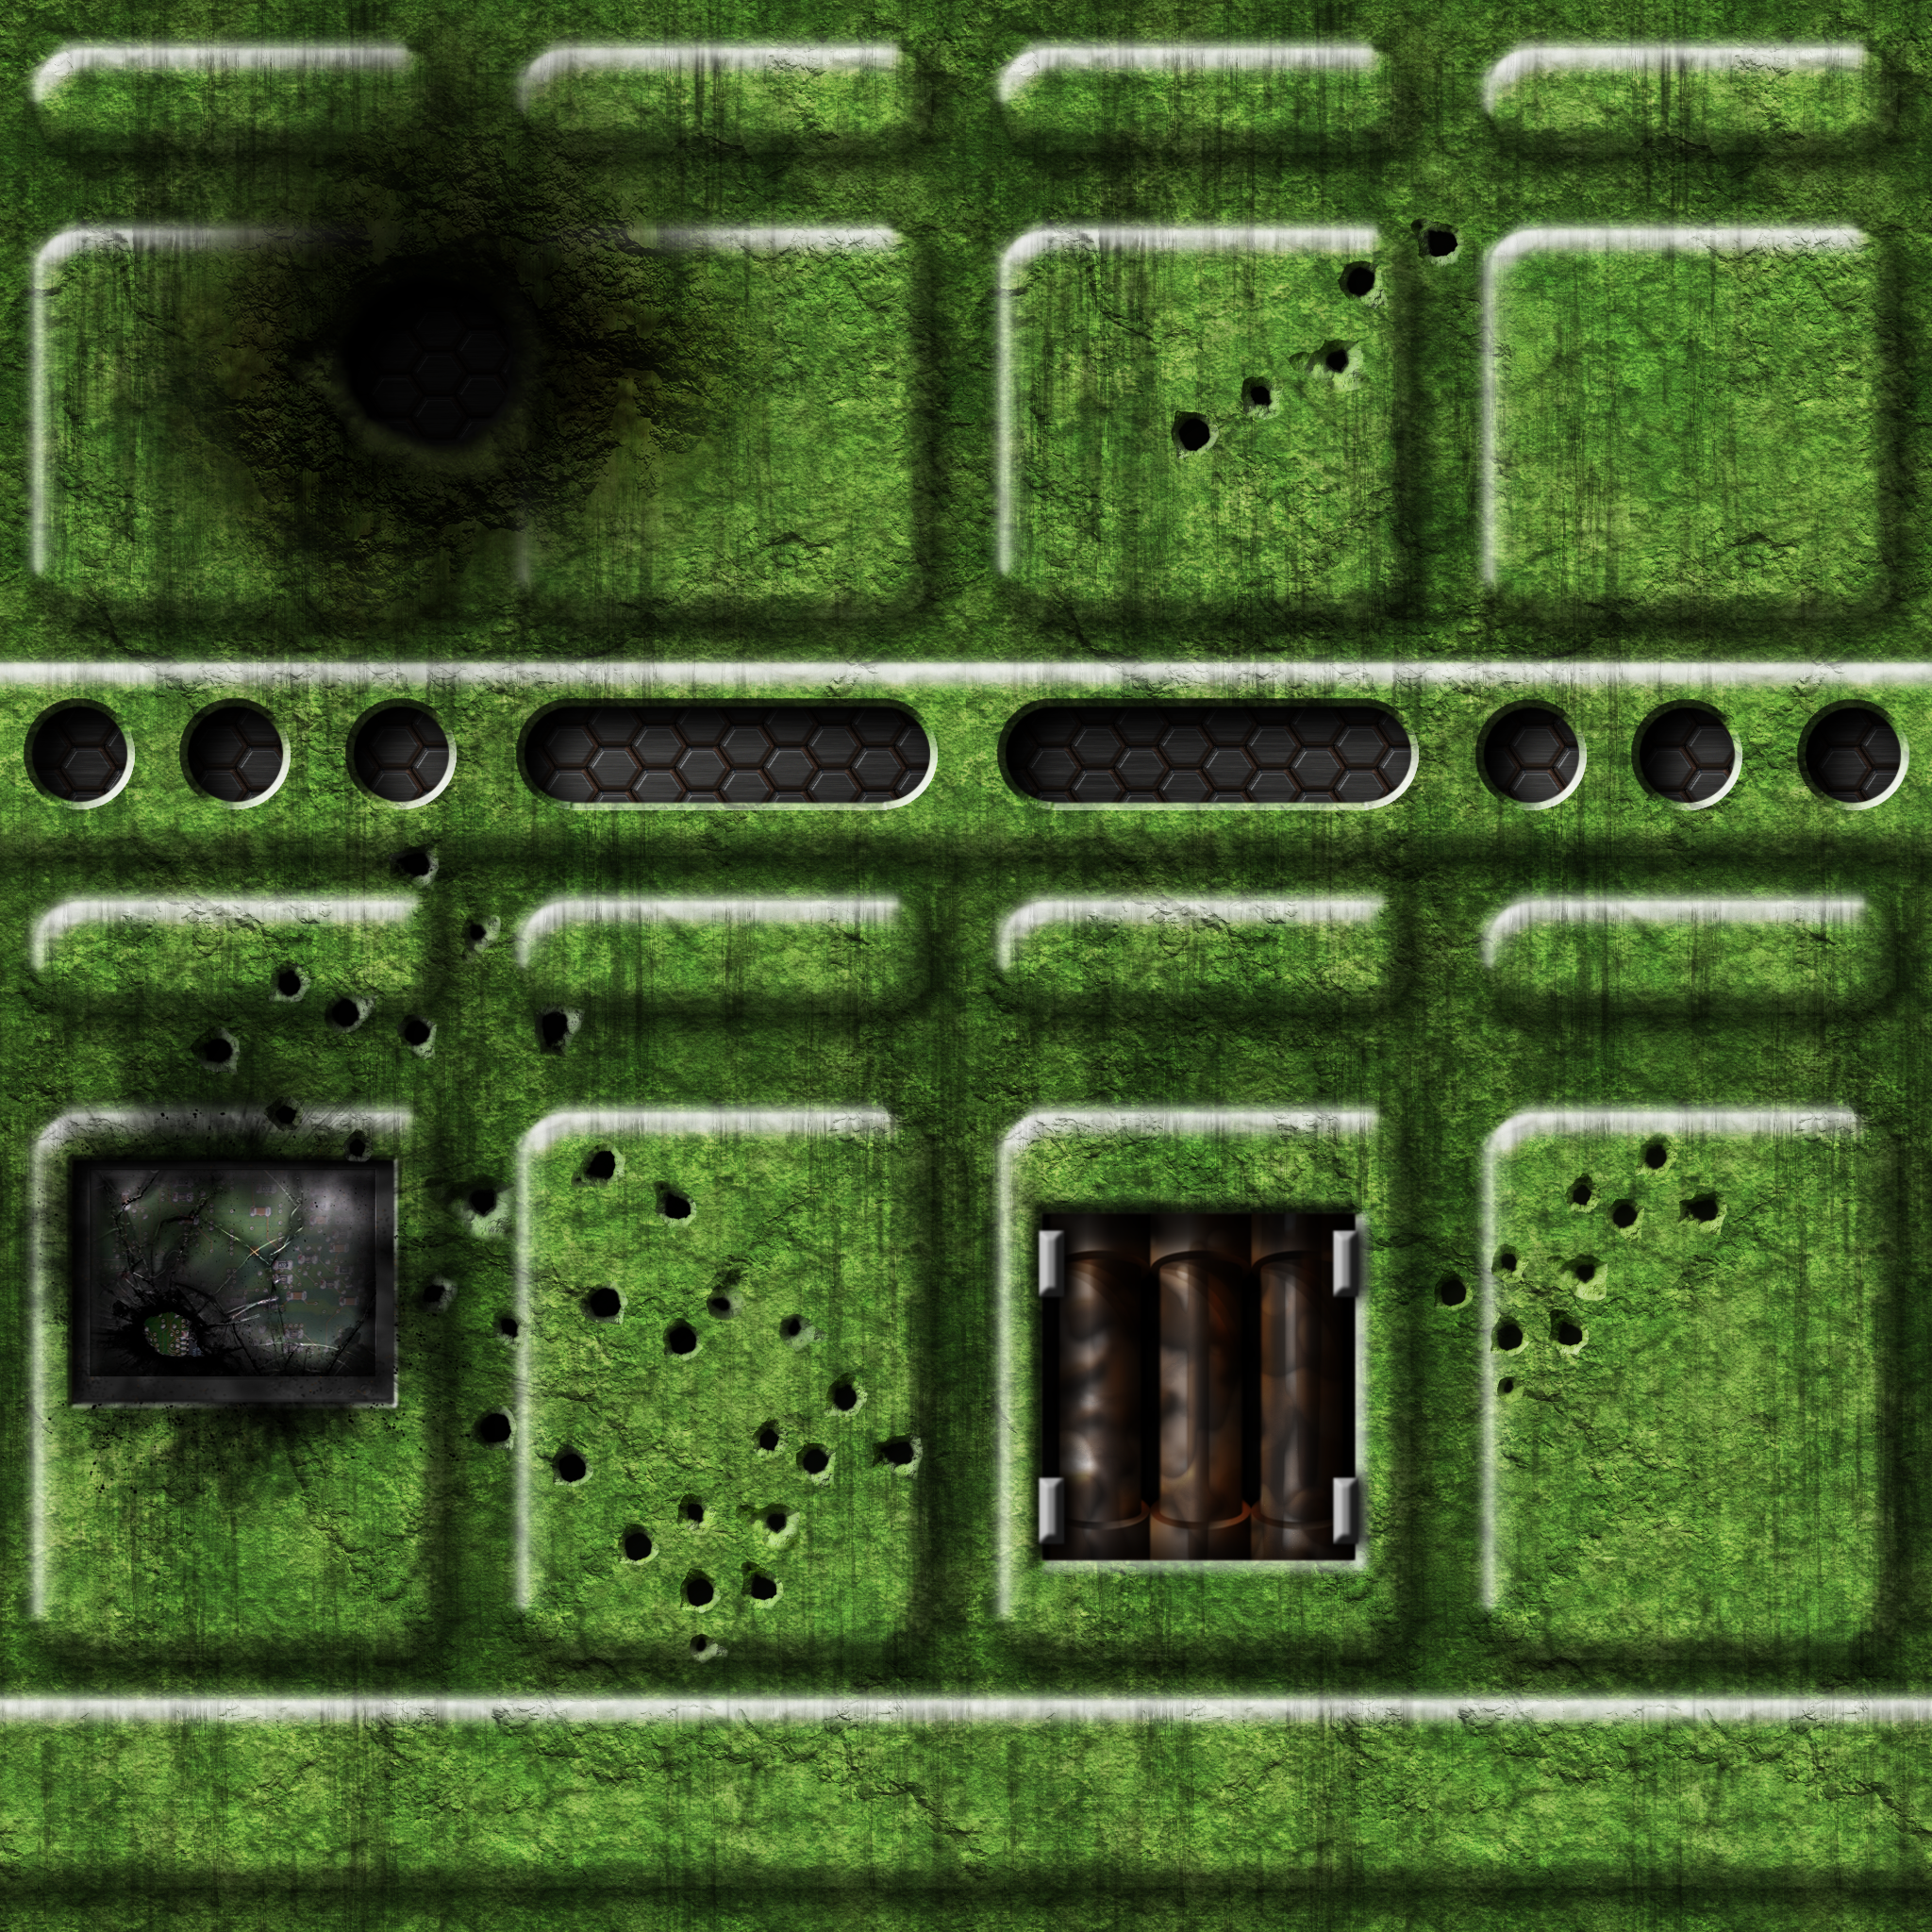 green_wall_with_damage_motifs_by_hoover1979-daawbd4.png